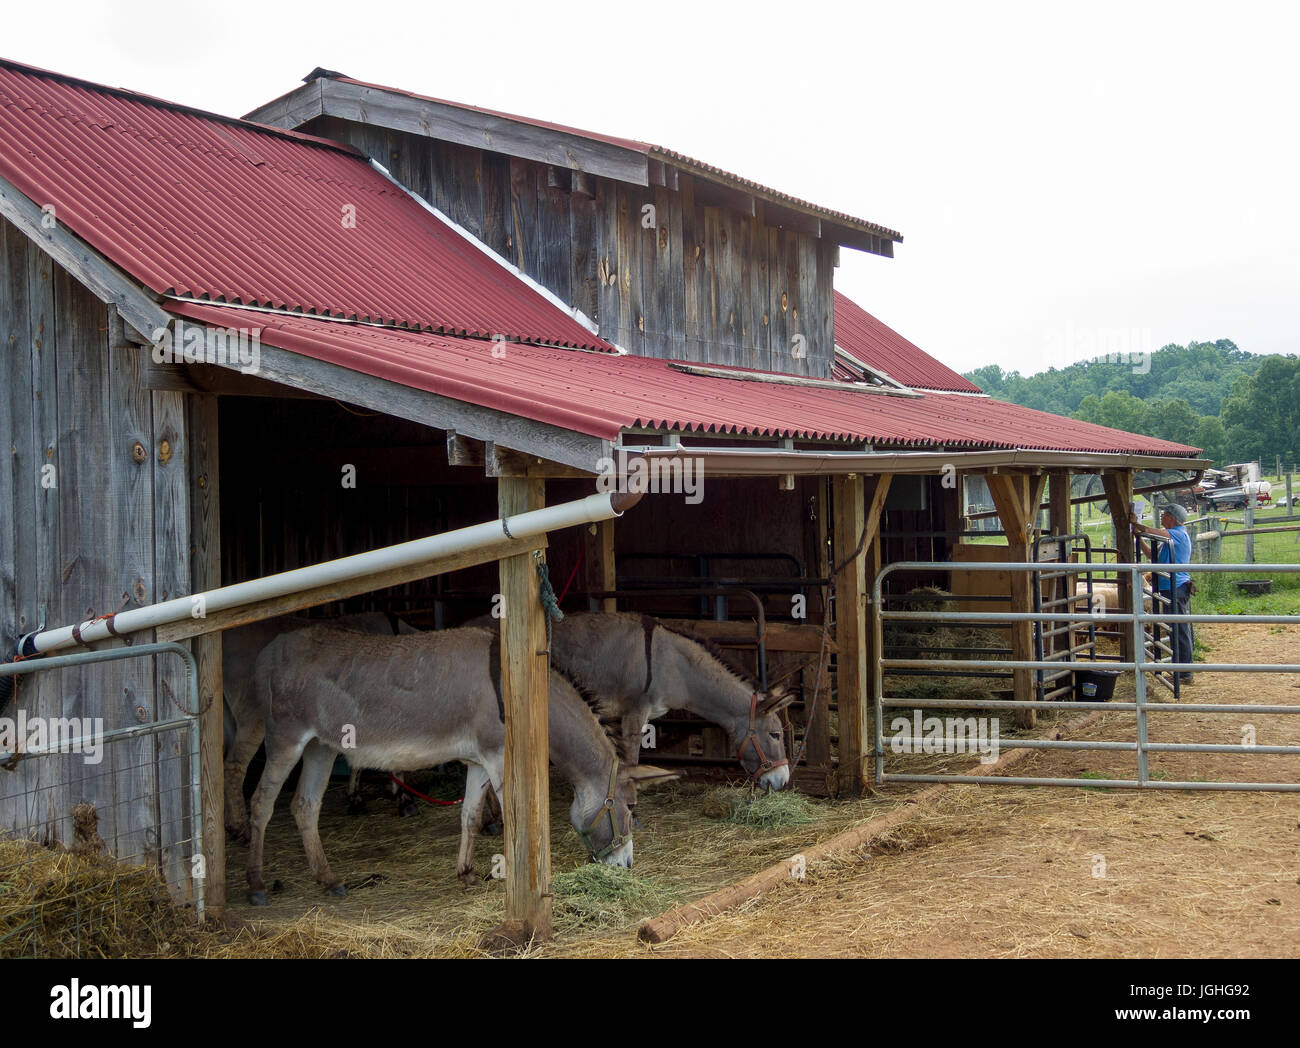 Rustic open barn  with 2 donkeys grazing on hay Stock Photo